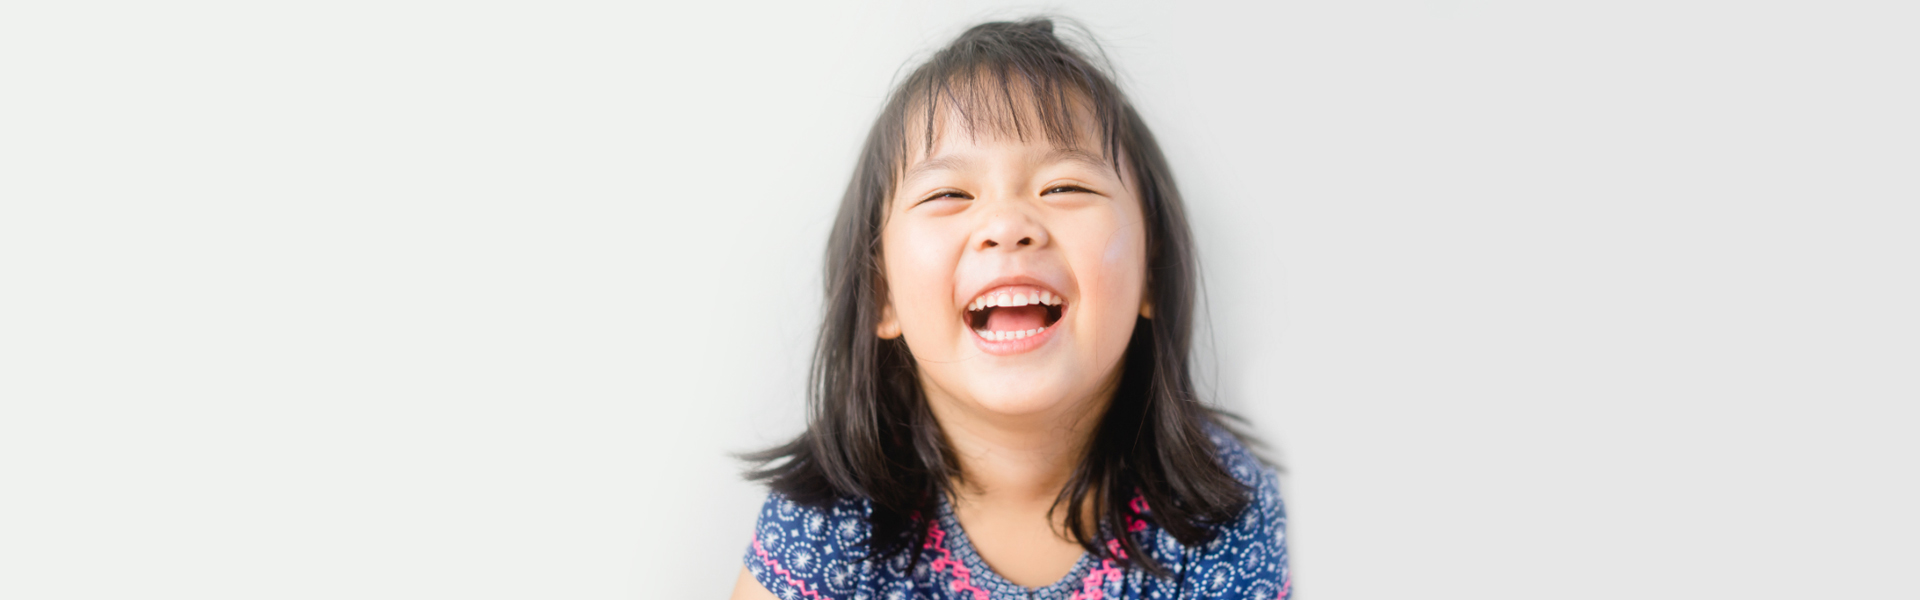 What Does Pediatric Dentistry Entail?